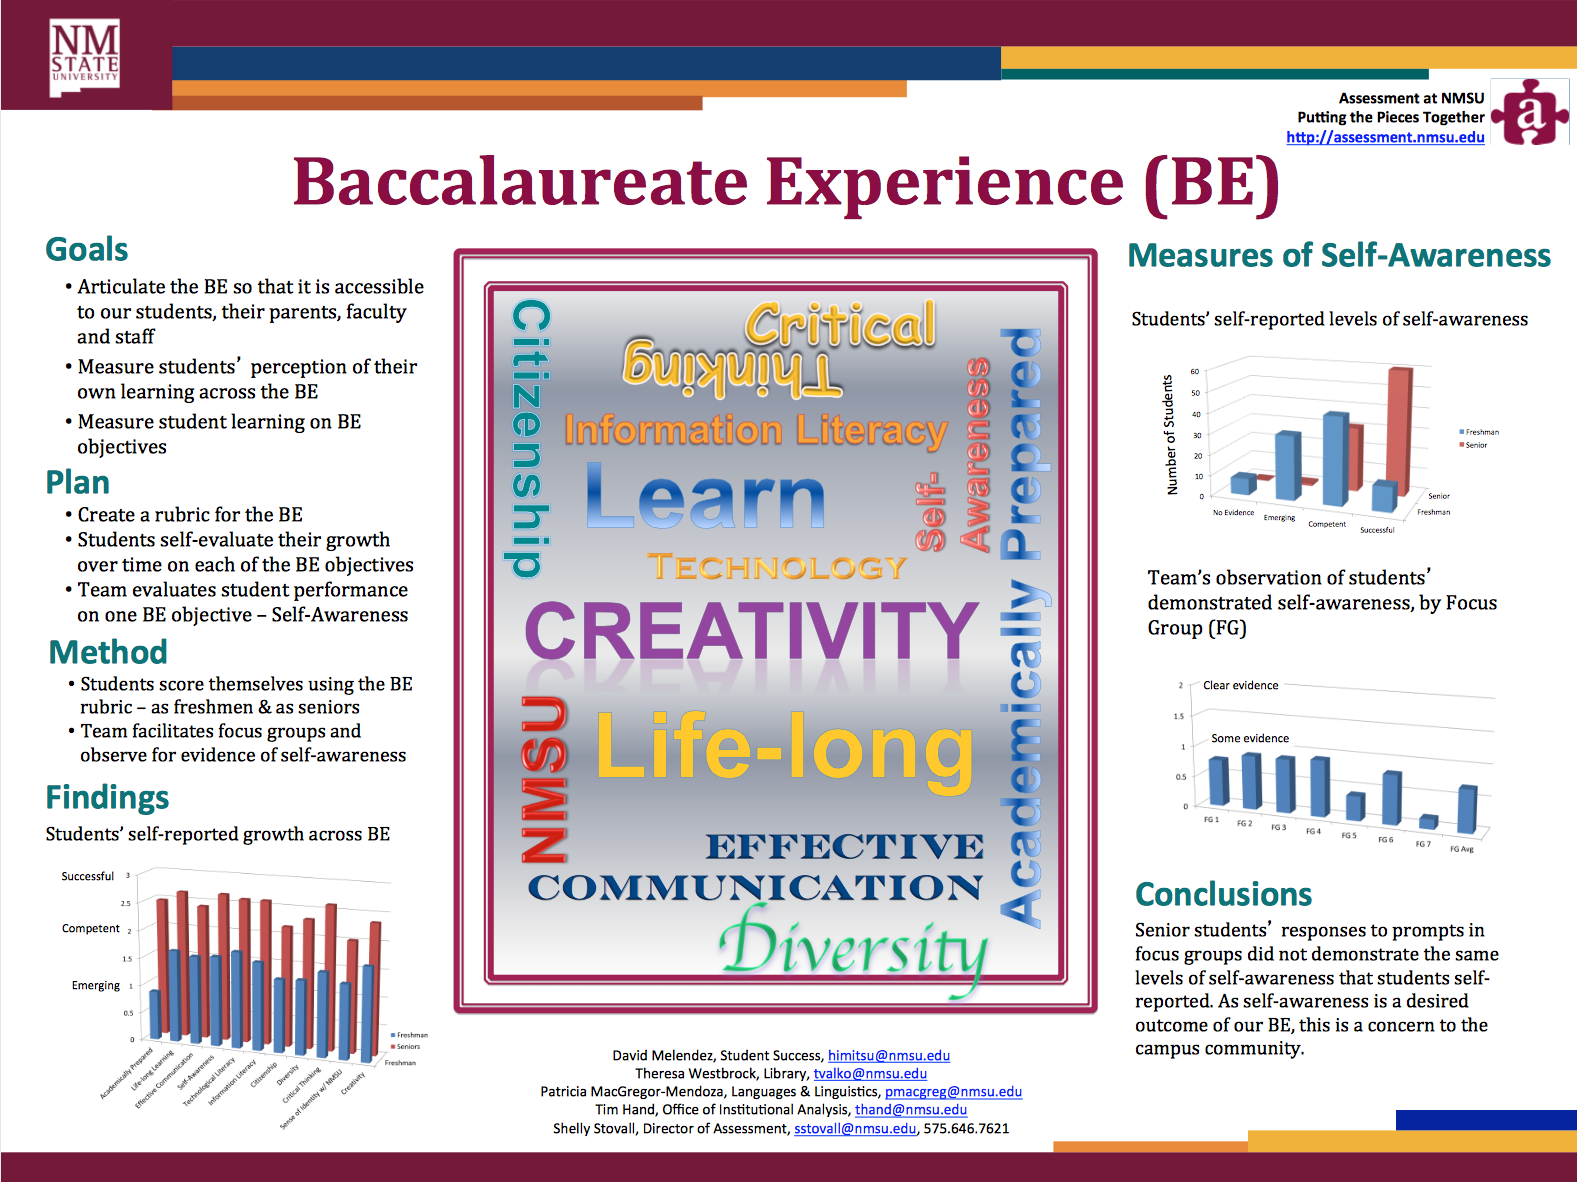 A snapshot of the baccalaureate experience assessment. Due to this being an old document, a pdf version is not available